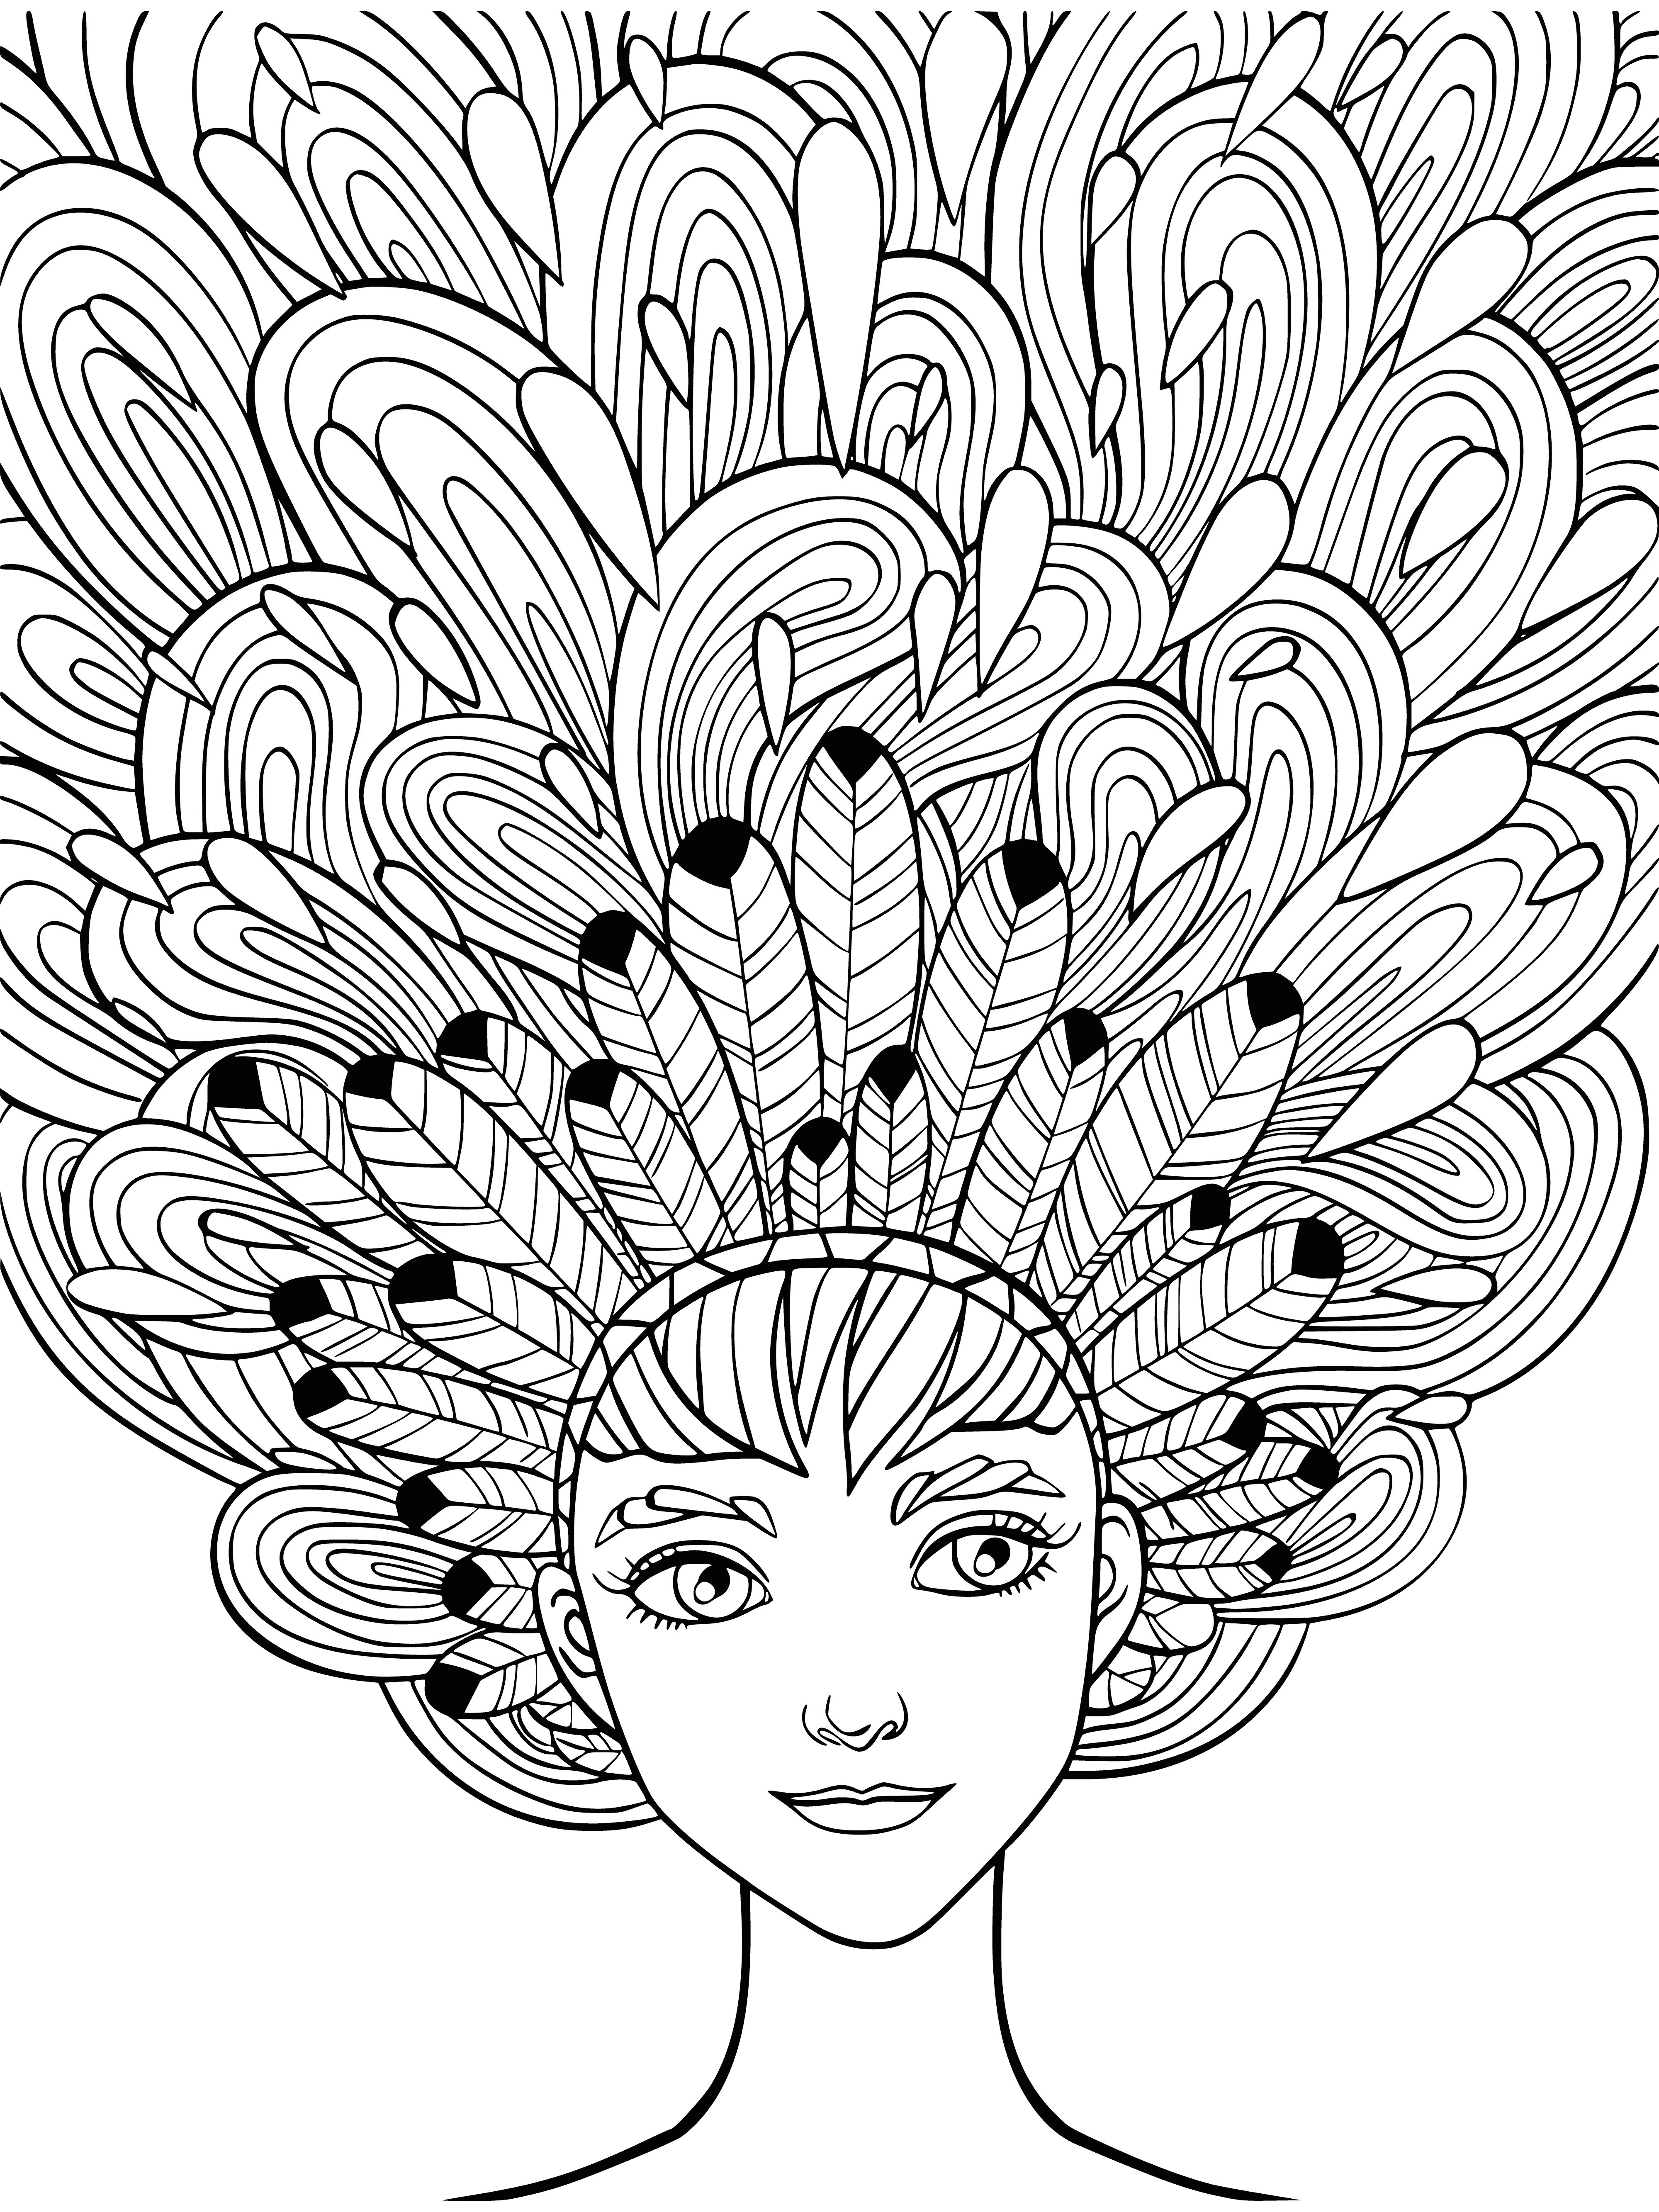 coloring page: A girl in a firebird costume soars above a cityscape, streams of hair and cape flapping, ready for any adventure.